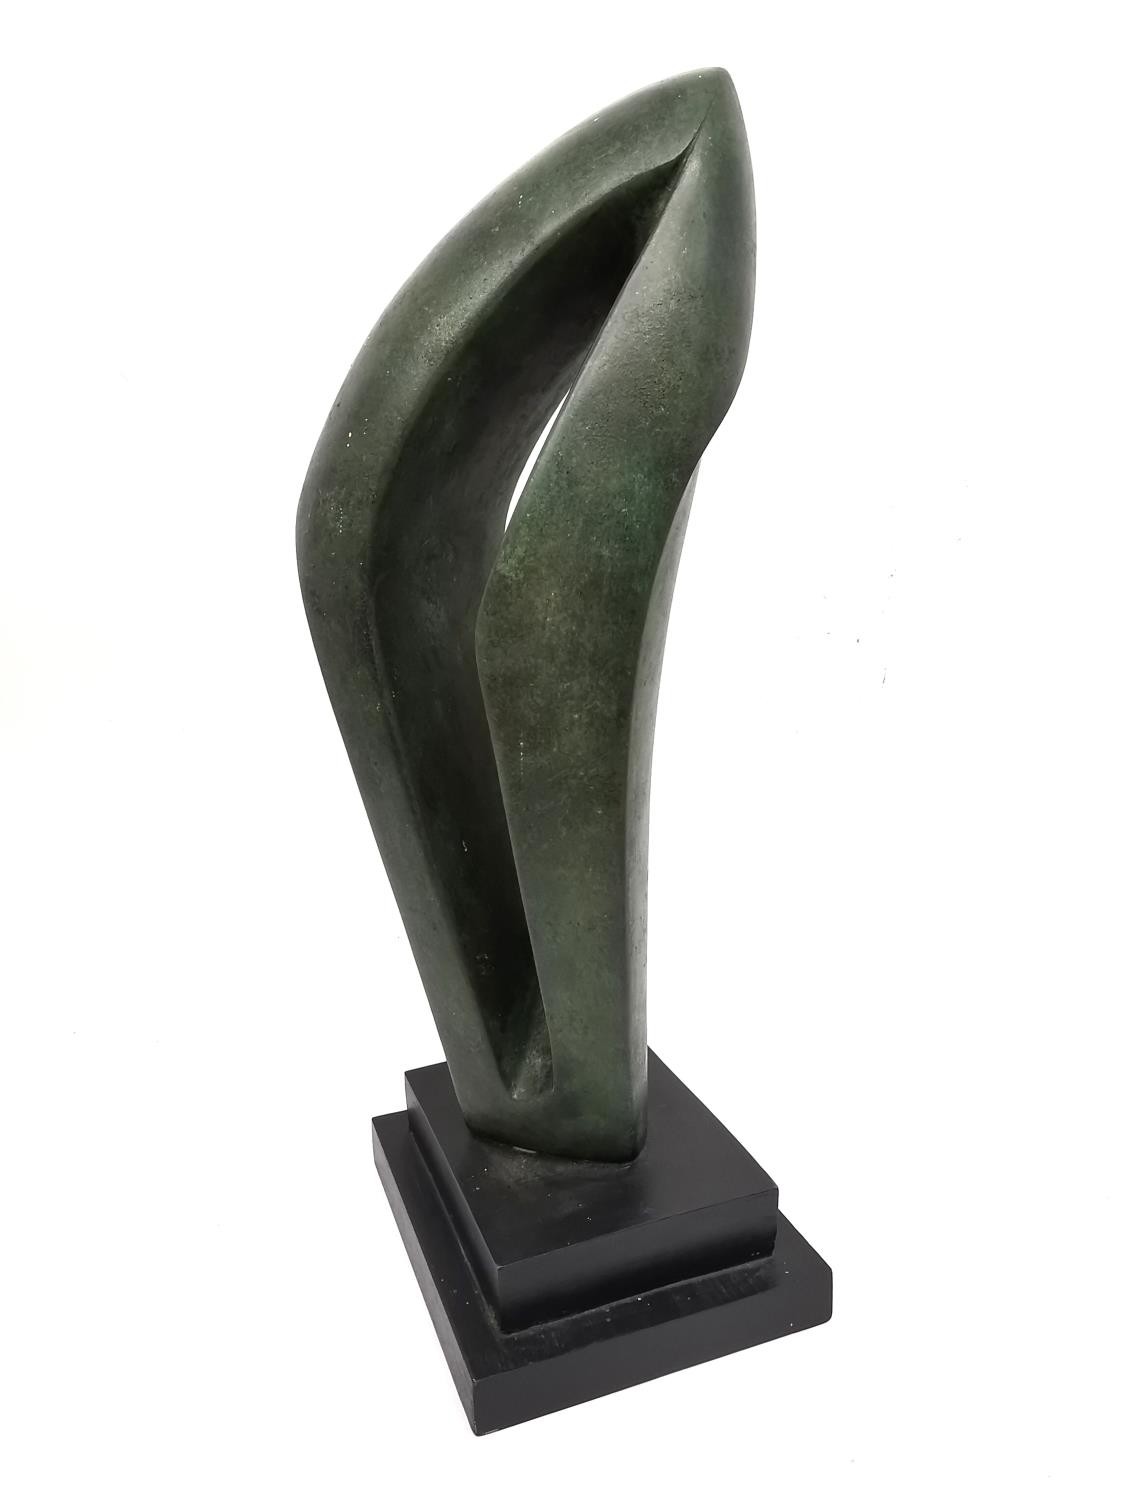 An abstract bronze effect resin sculpture on stepped base. H.41 W.16 D.14cm. - Image 6 of 6